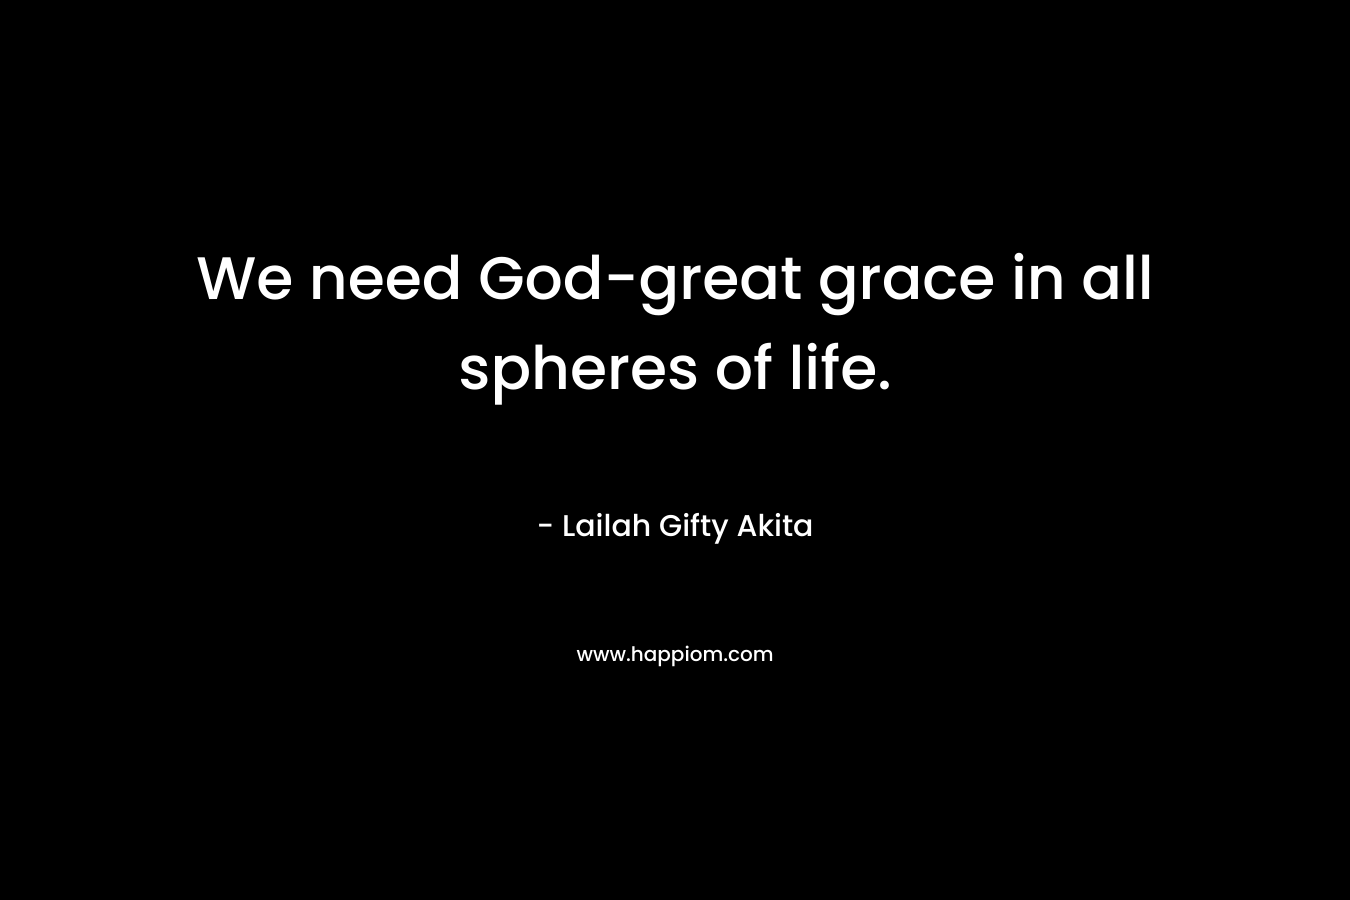 We need God-great grace in all spheres of life.